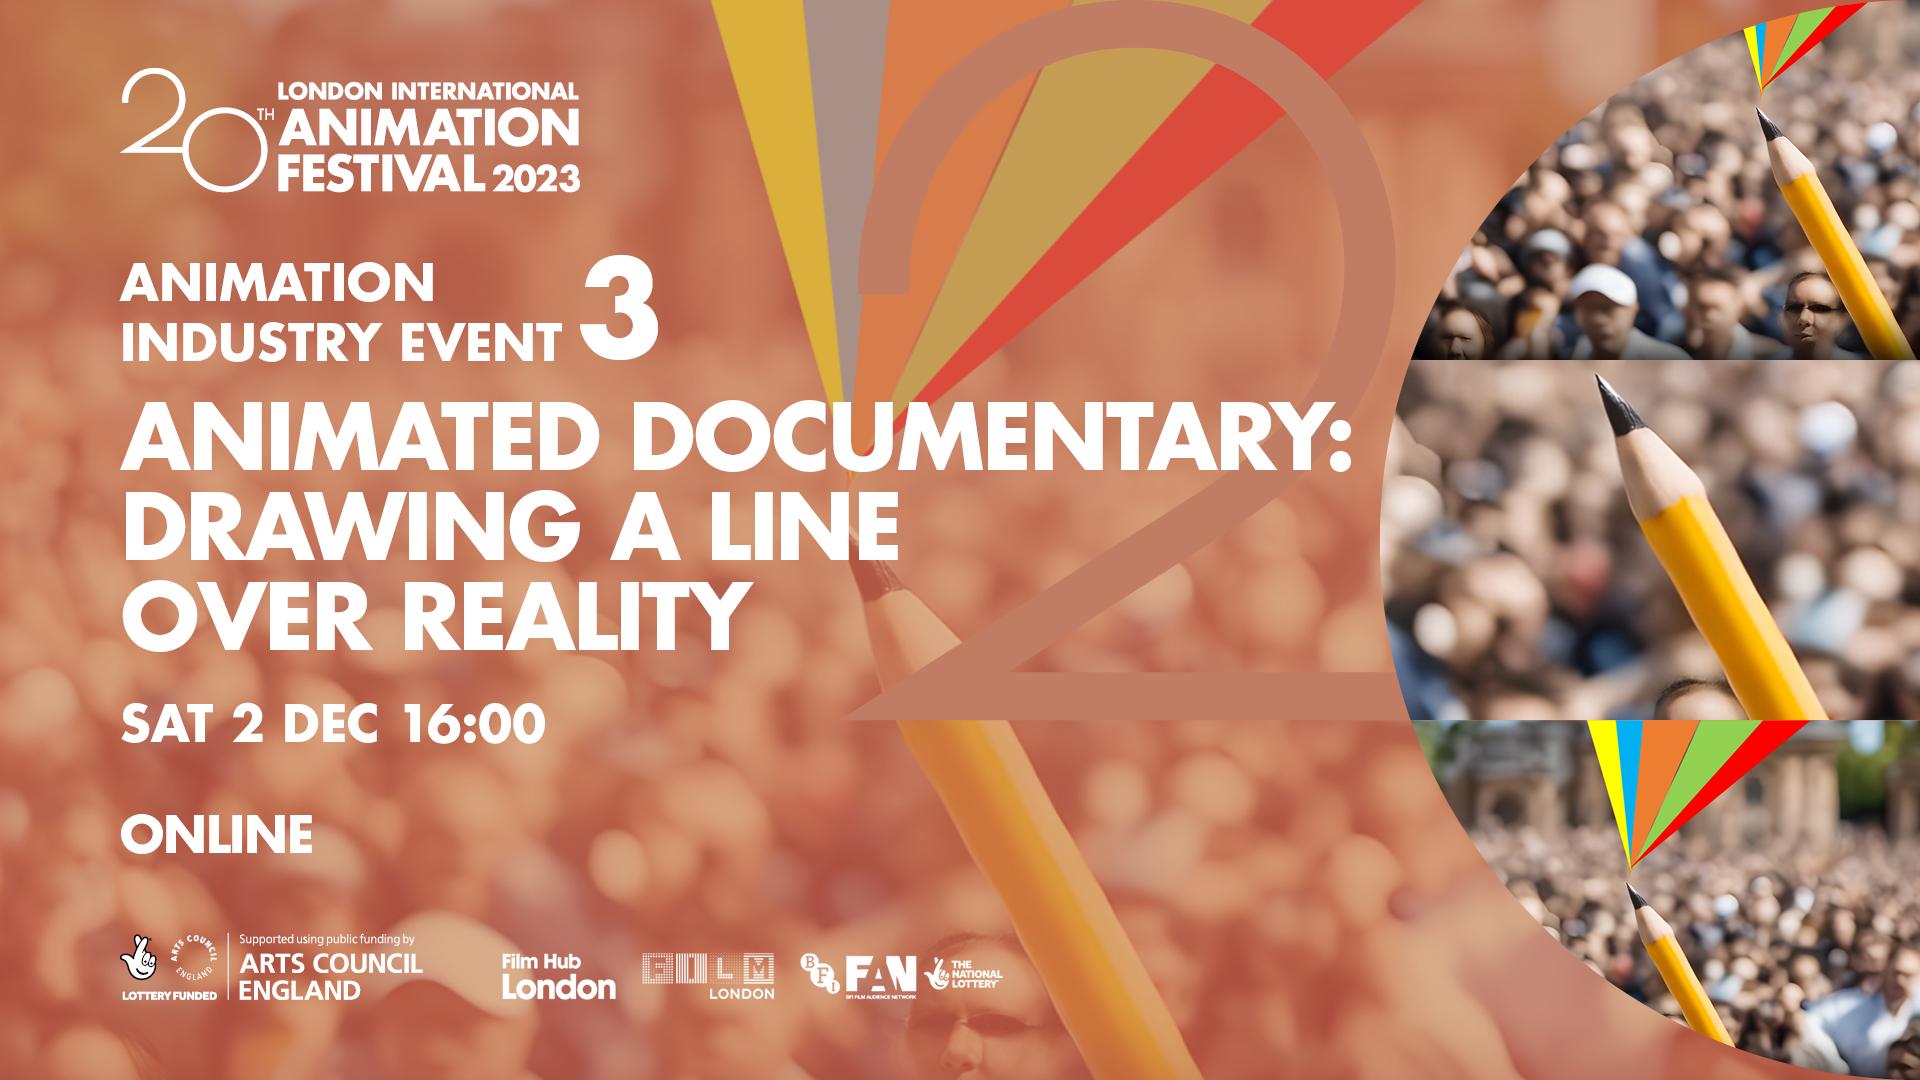 Animation Industry Event 3: Animated Documentaries - Drawing a Line over Reality